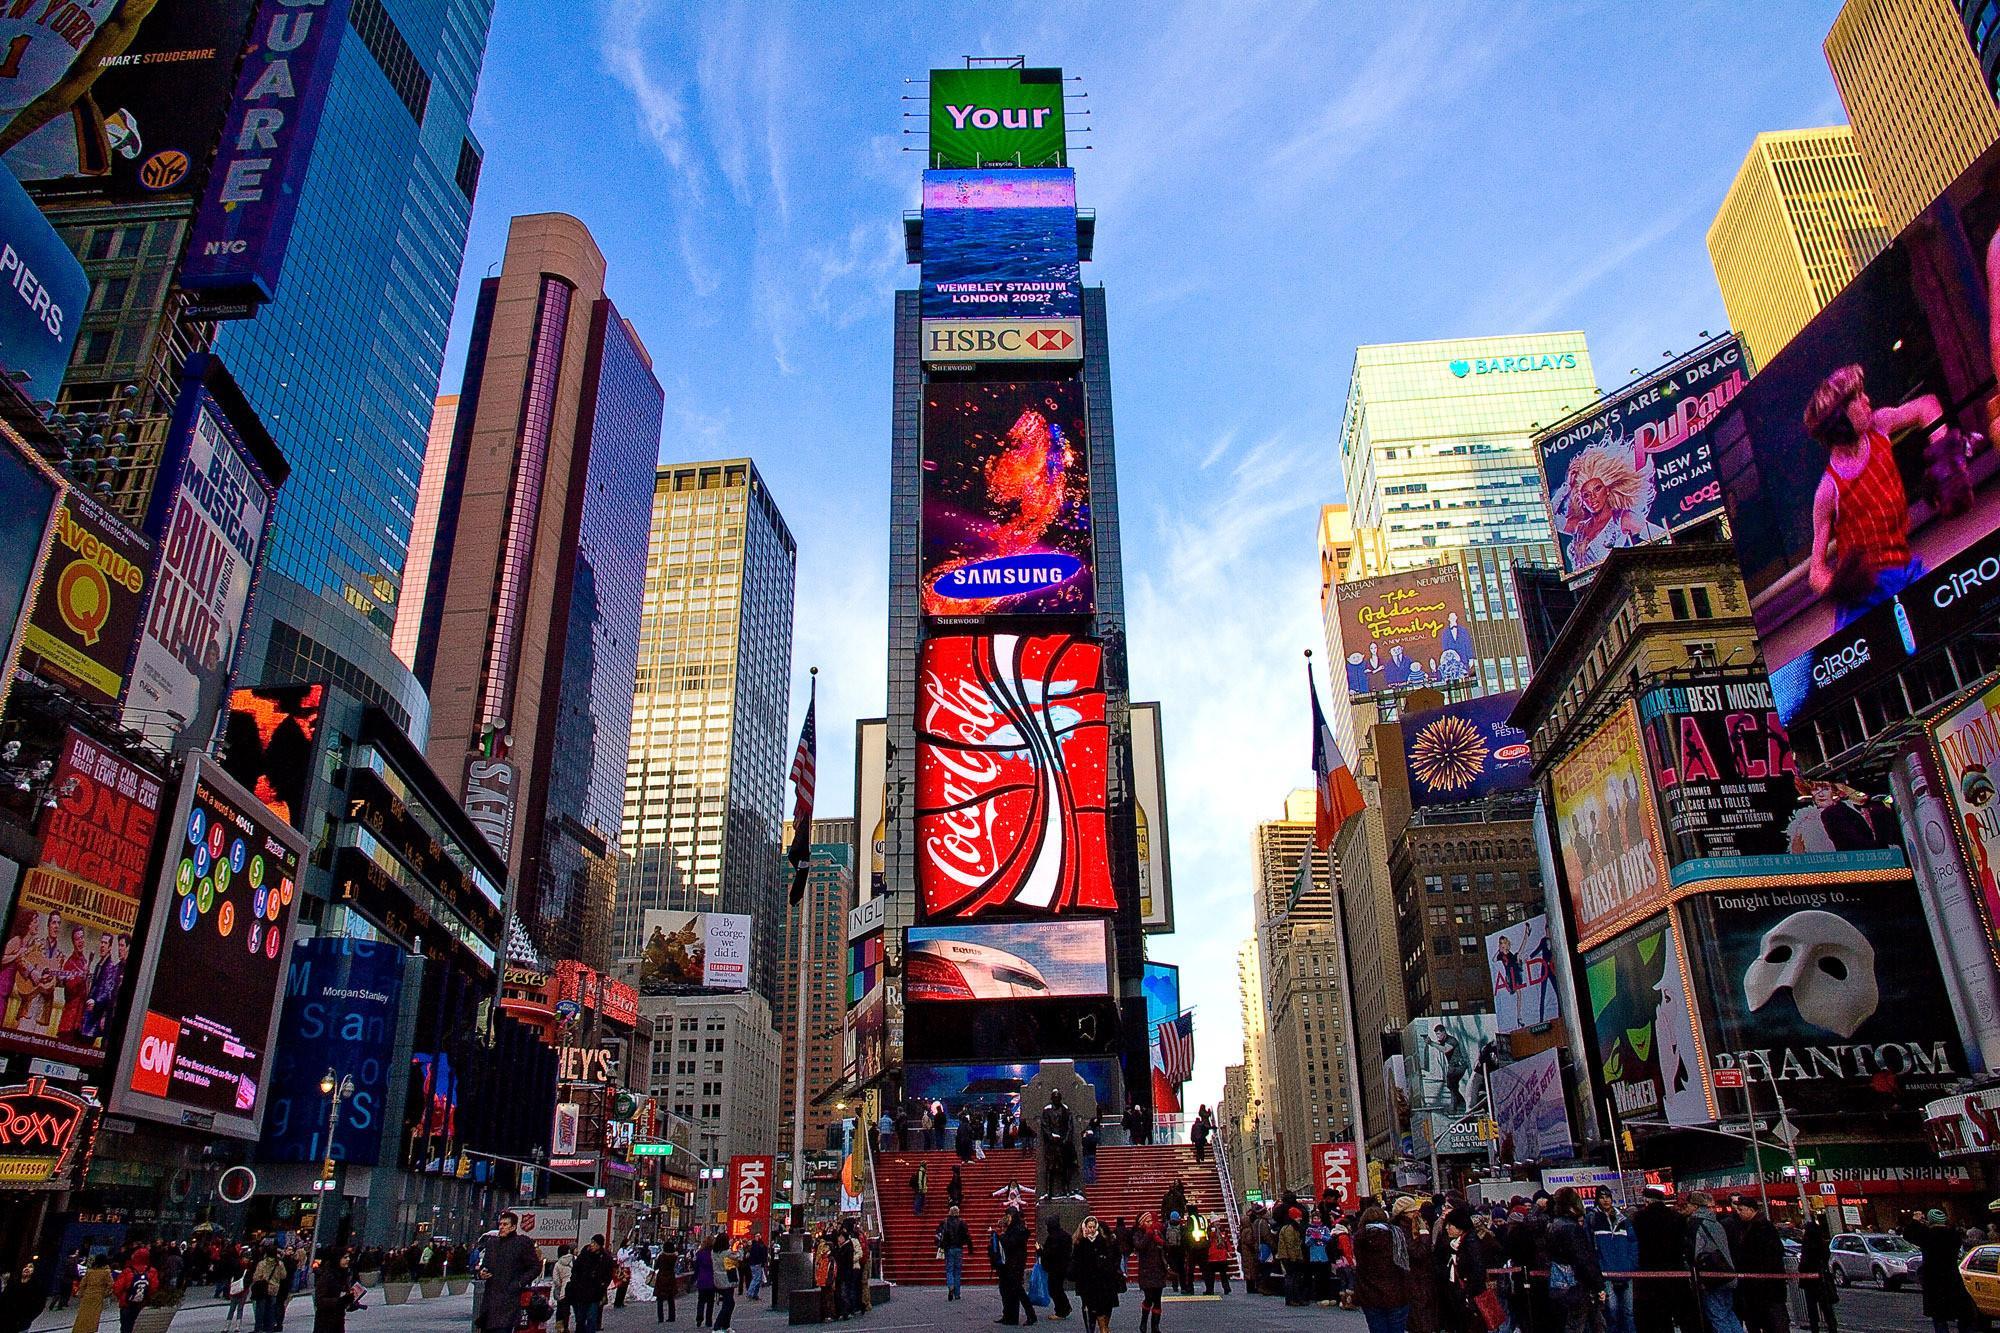 Times Square HD Wallpaper , Find HD Wallpaper For Free